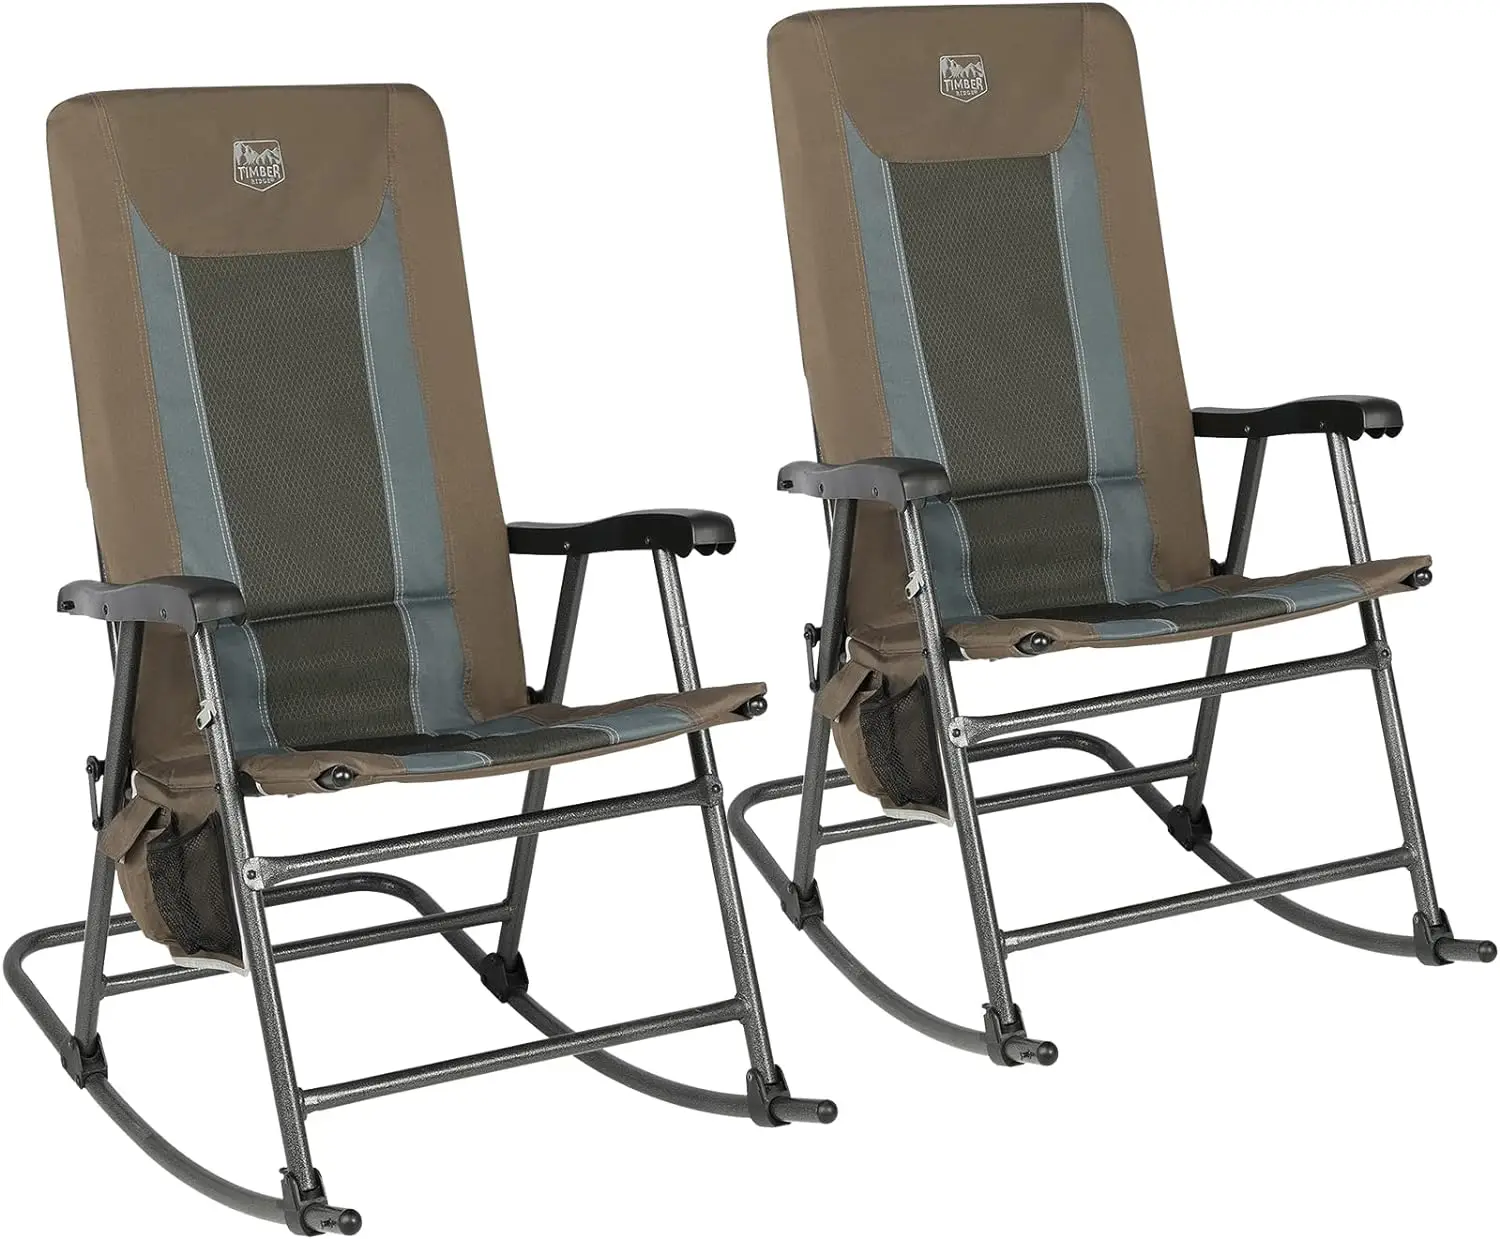 TIMBER RIDGE Foldable Padded Rocking Chair Set of 2 for Outdoor, High Back and Heavy Duty, Portable for Camping, Patio, Lawn